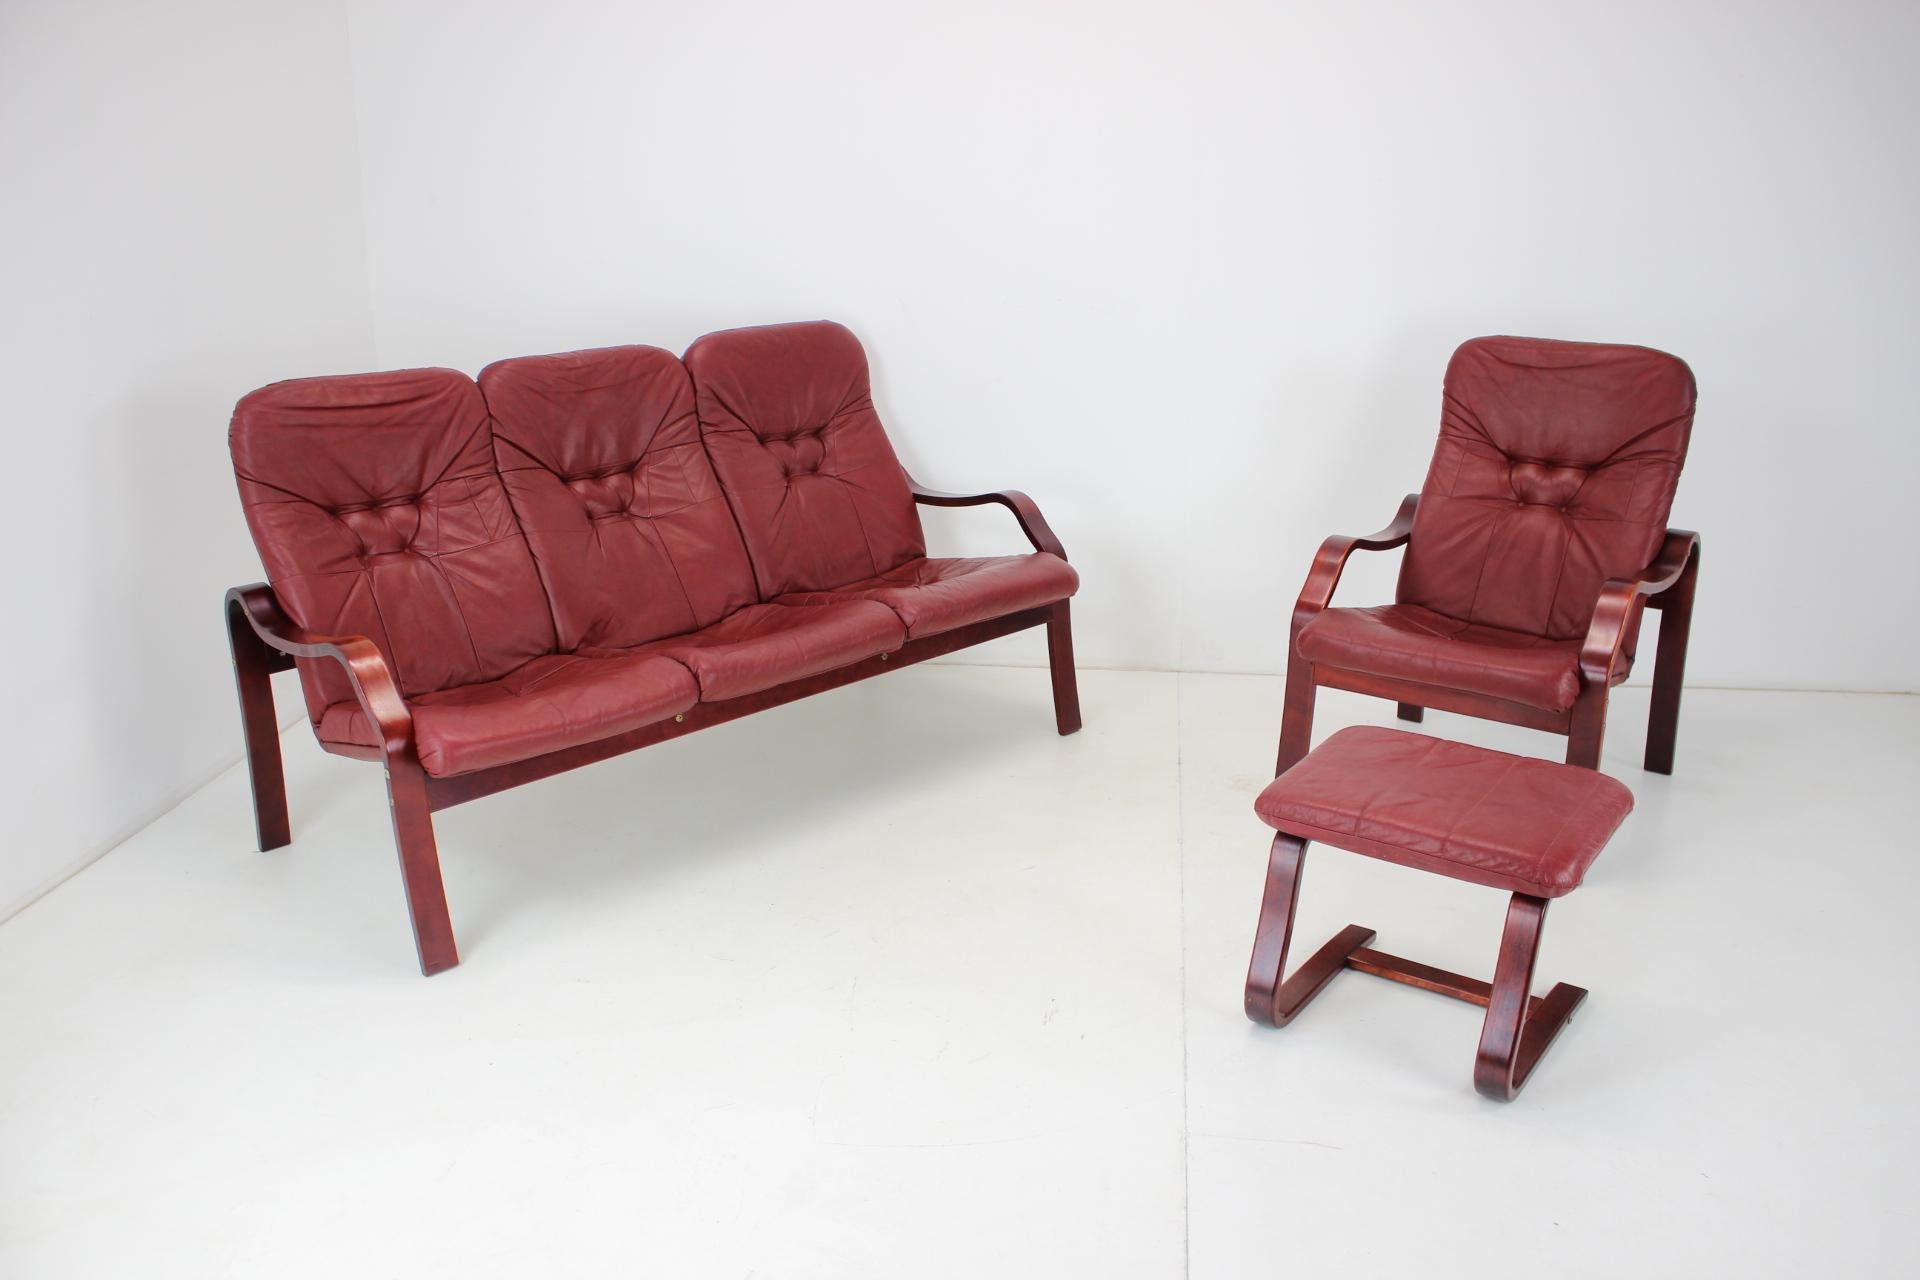 Produced by Ton, Czechoslovakia in the late 1980s.
The frame is made of beech bent wood.
Leather
Measures: Seat height 42 cm
The color is burgundy.
Armchair size, height 89cm, width 61cm, depth 73cm.